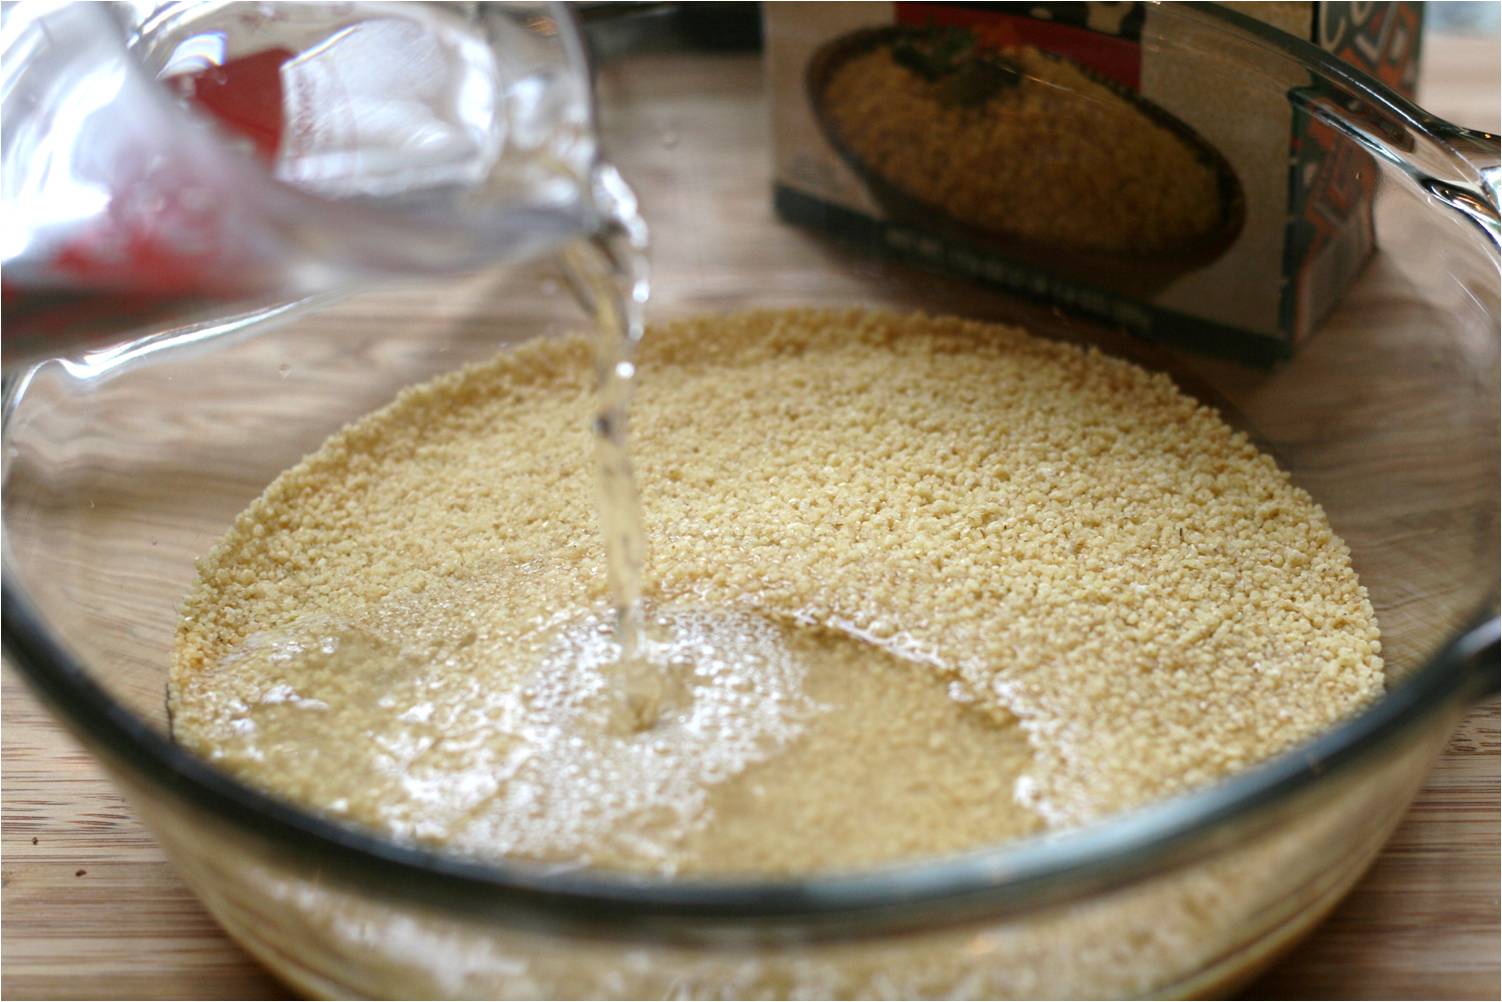 Add boiling water to couscous